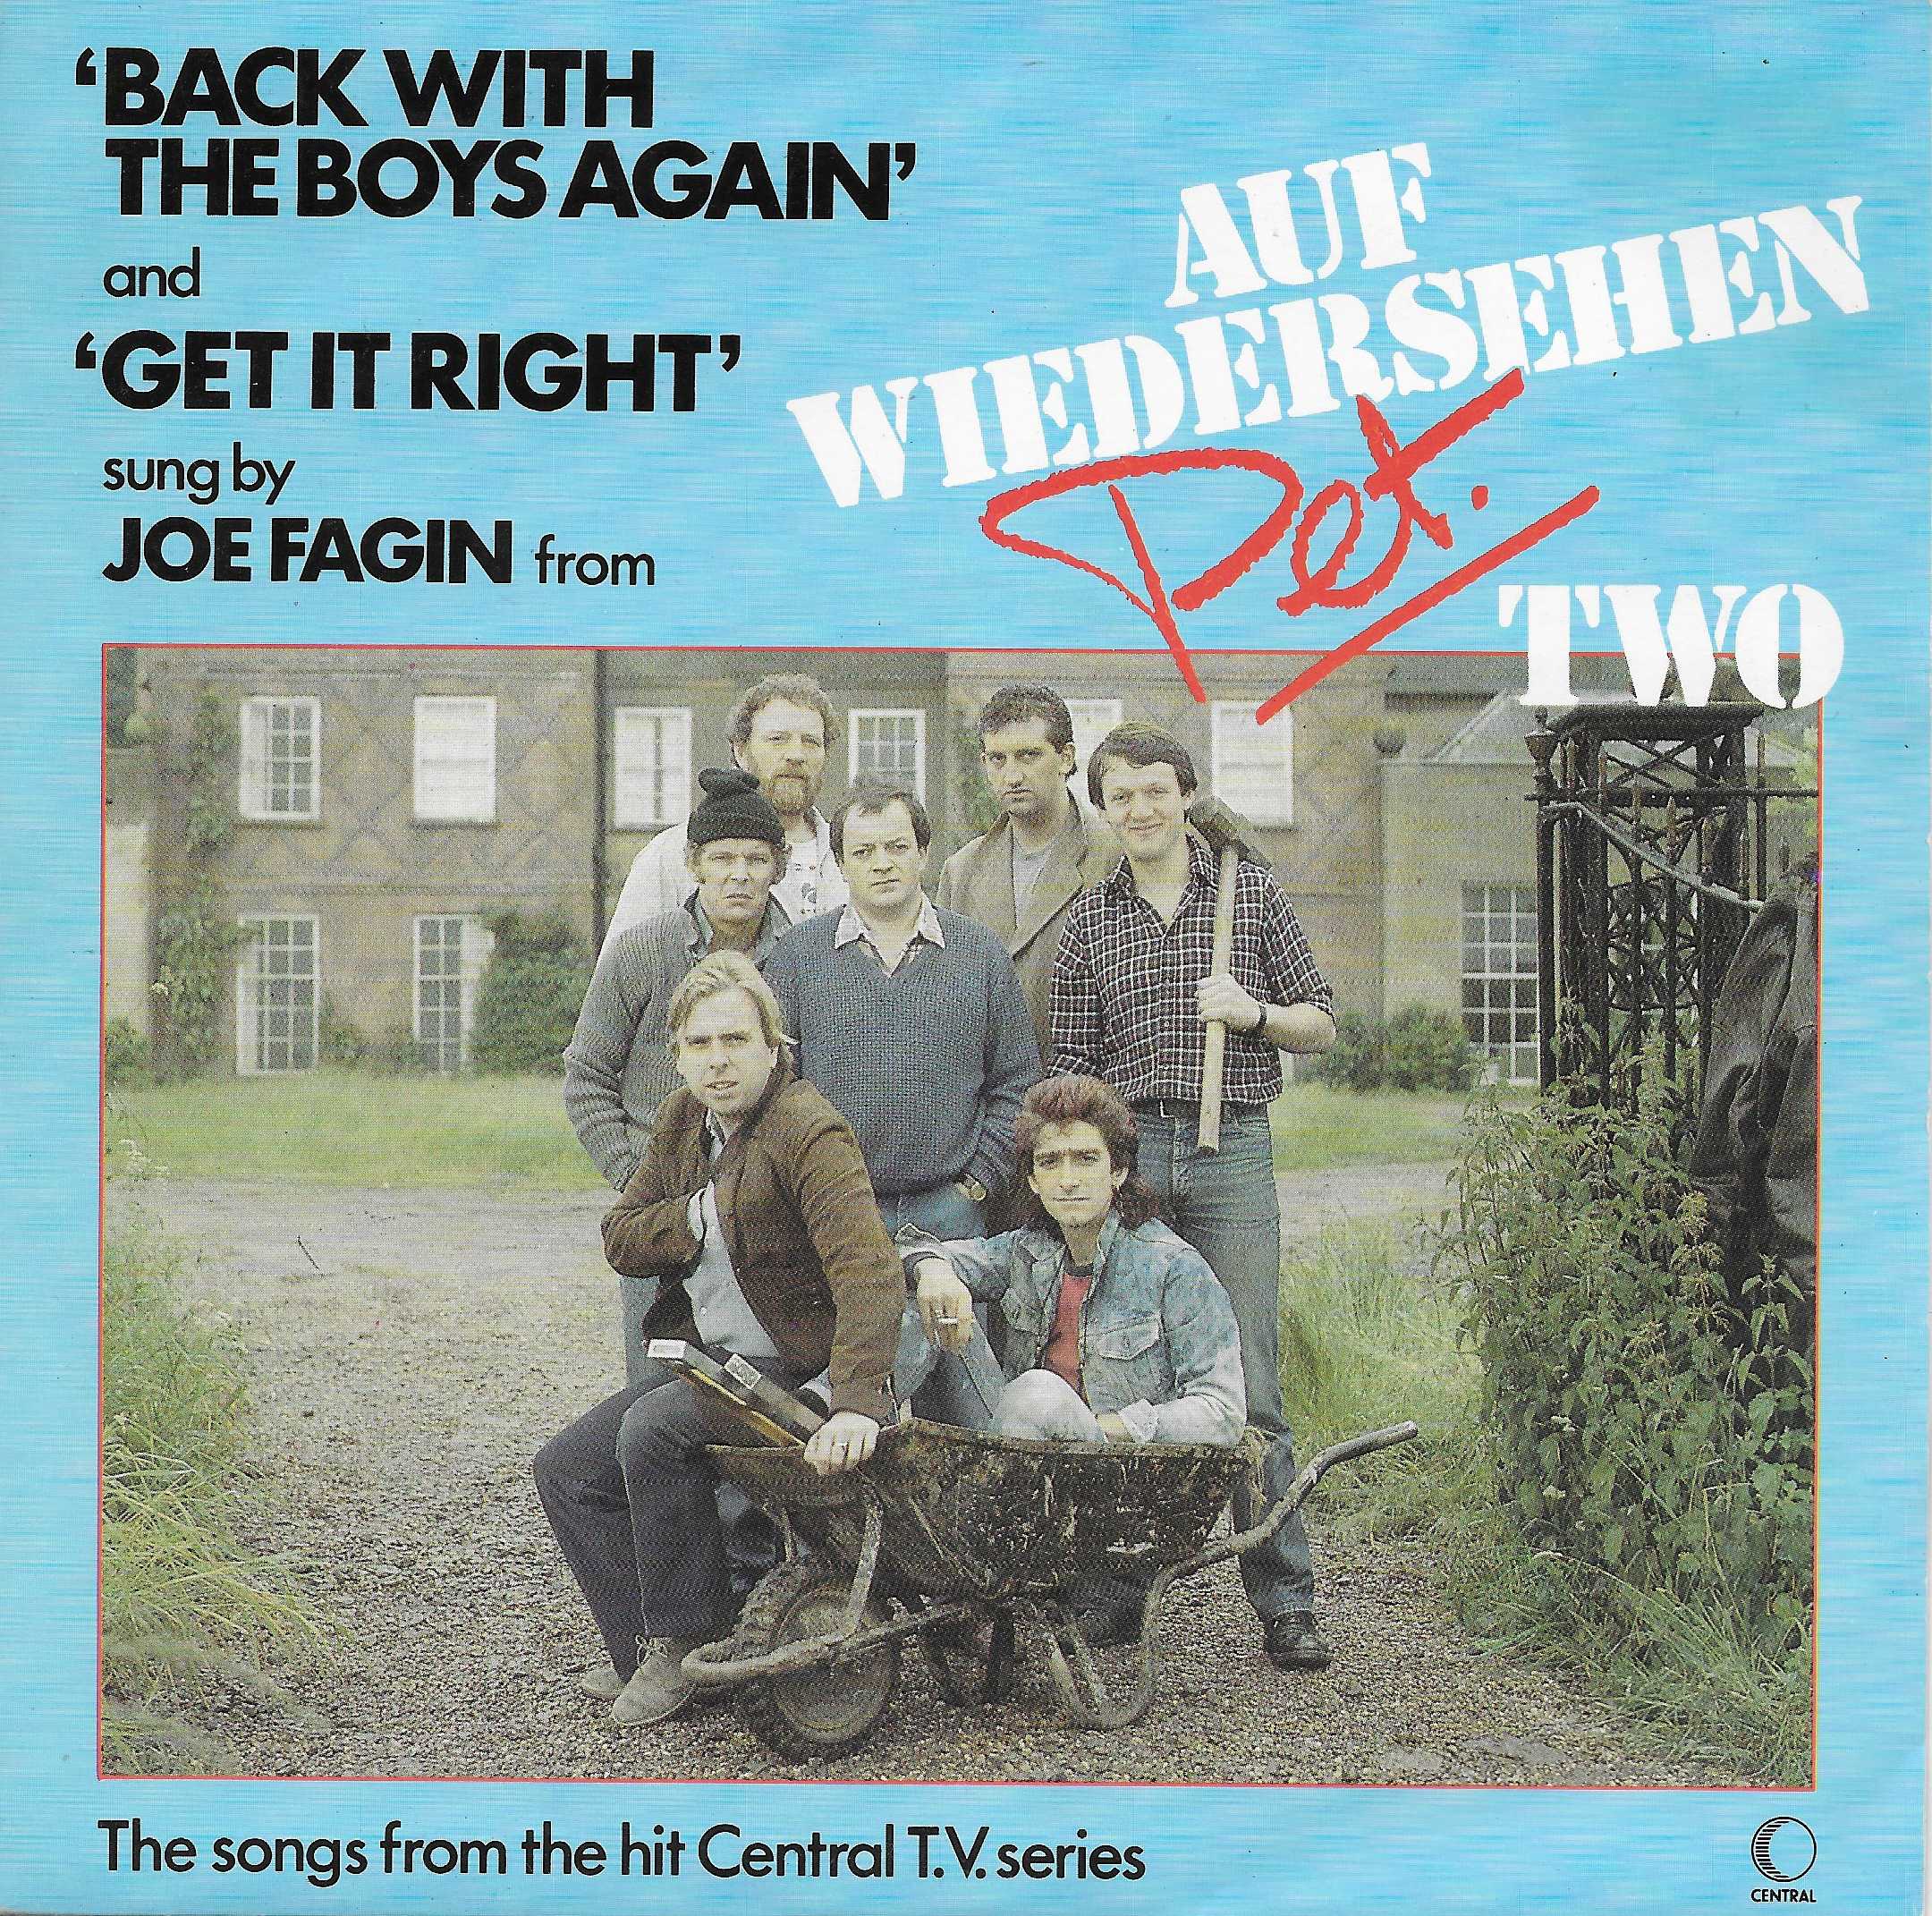 Picture of TOW 84 Back with the boys again (auf wiedersehen pet) by artist Joe Fagin from ITV, Channel 4 and Channel 5 singles library